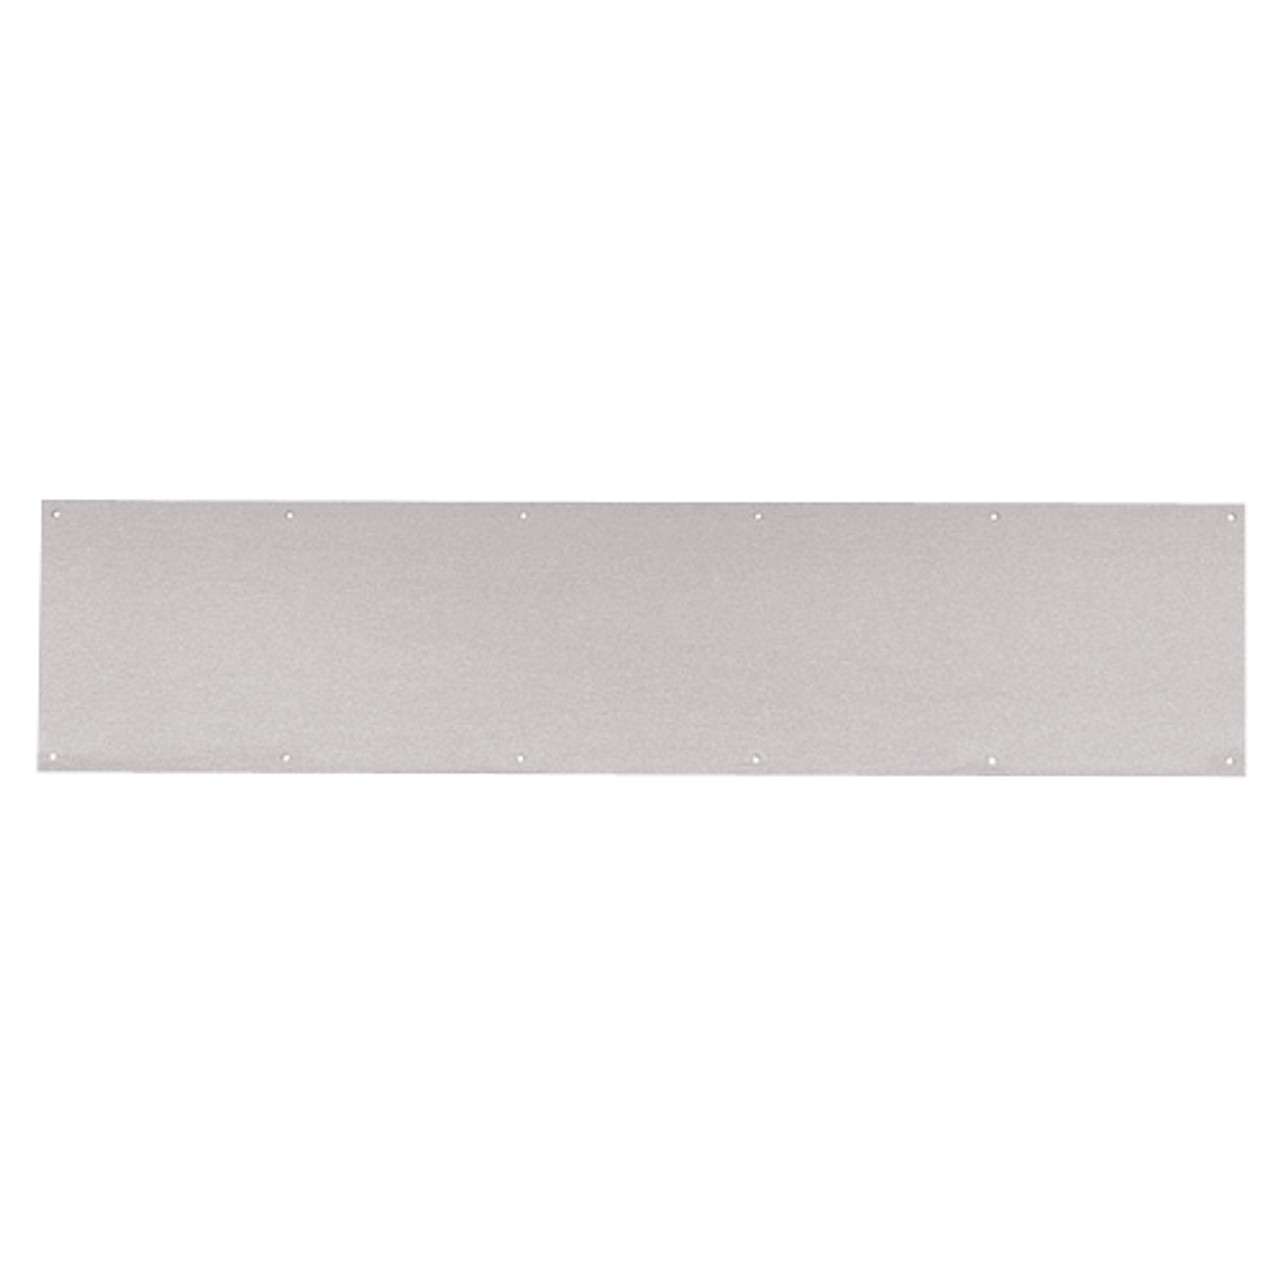 8400-US32D-24x30-B-CS Ives 8400 Series Protection Plate in Satin Stainless Steel